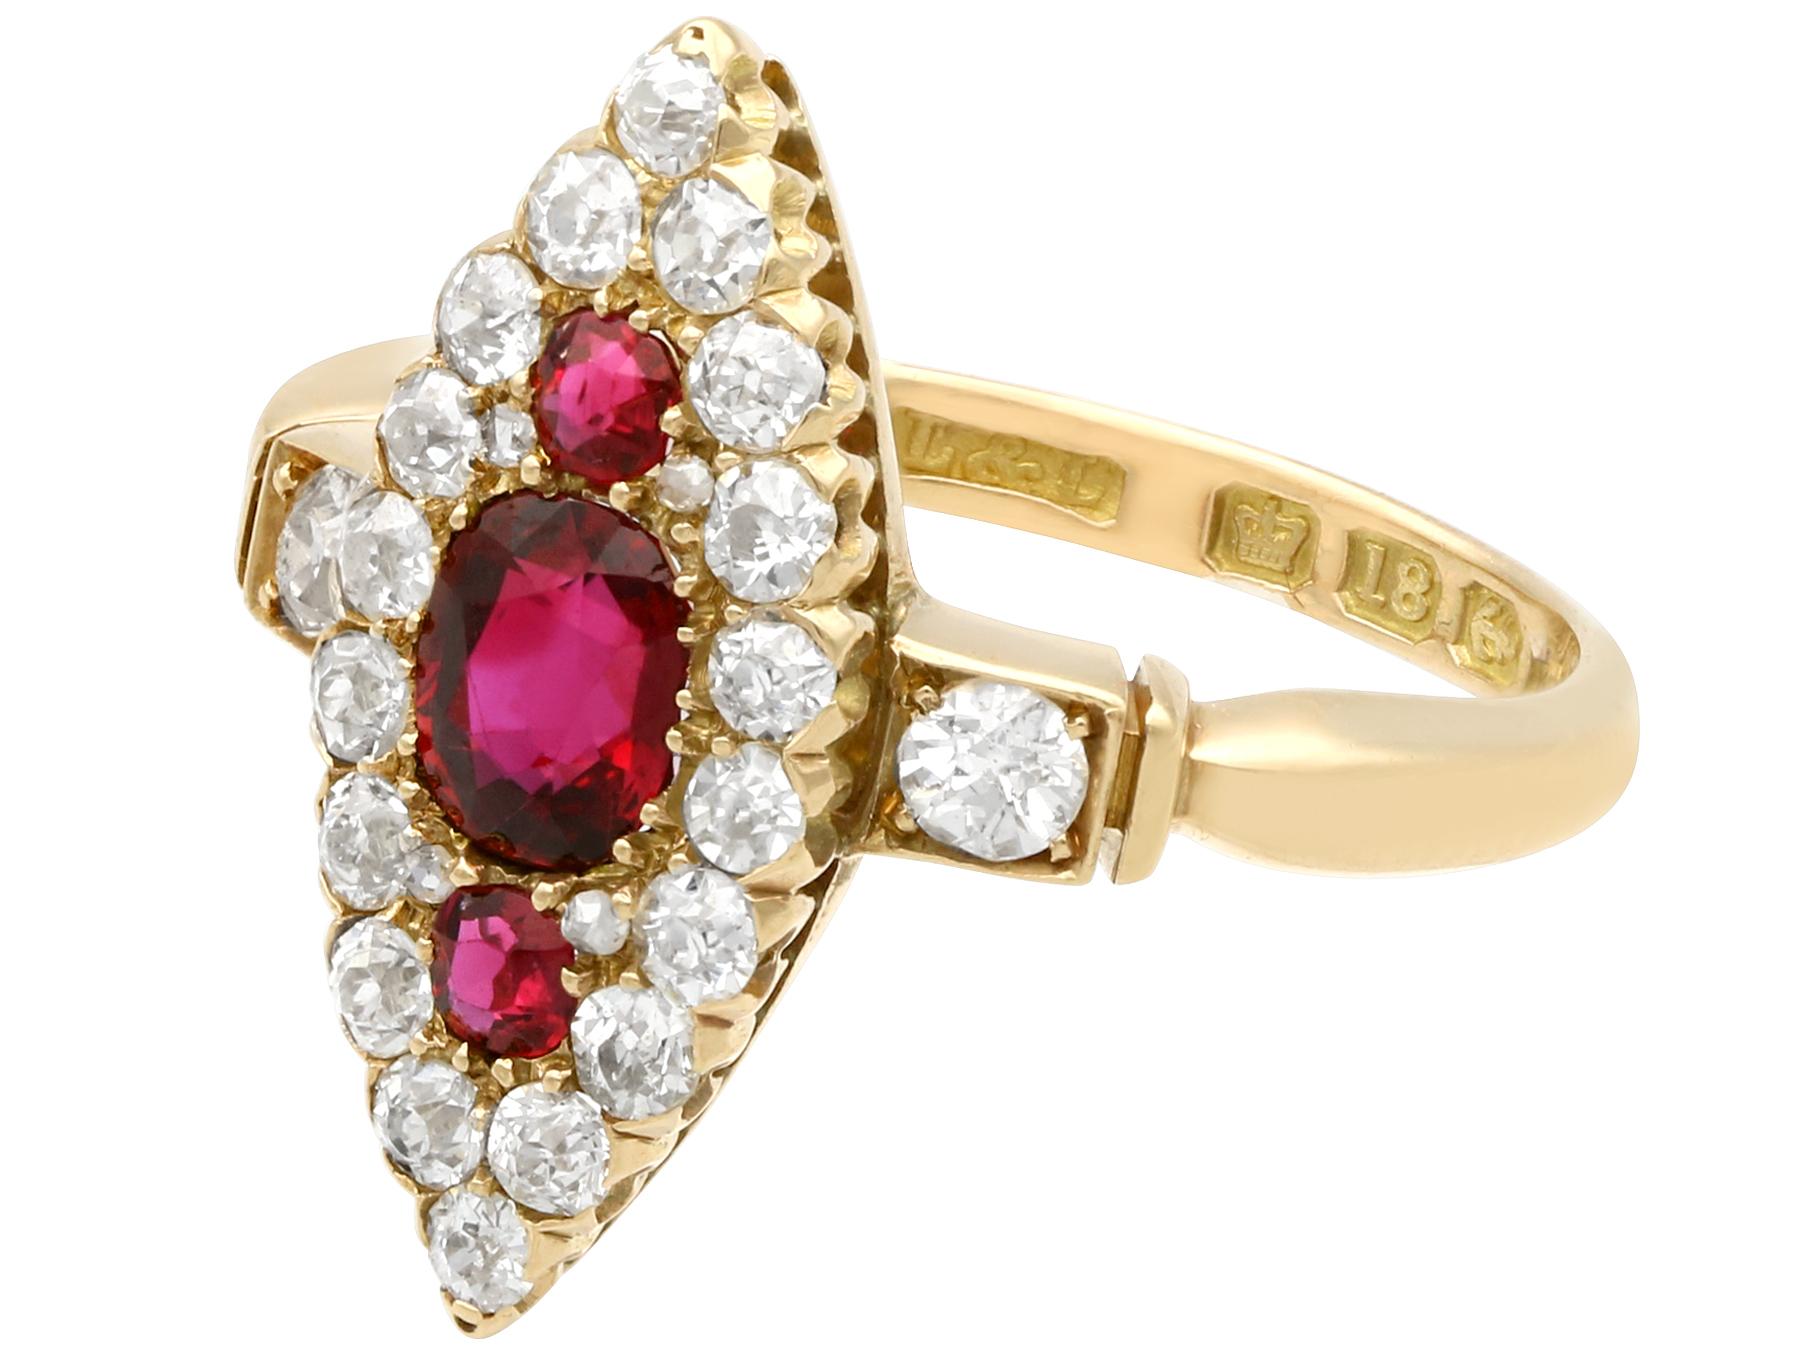 Edwardian 1.00 Carat Siam Ruby and 1.12 Carat Diamond Yellow Gold Cocktail Ring In Excellent Condition For Sale In Jesmond, Newcastle Upon Tyne